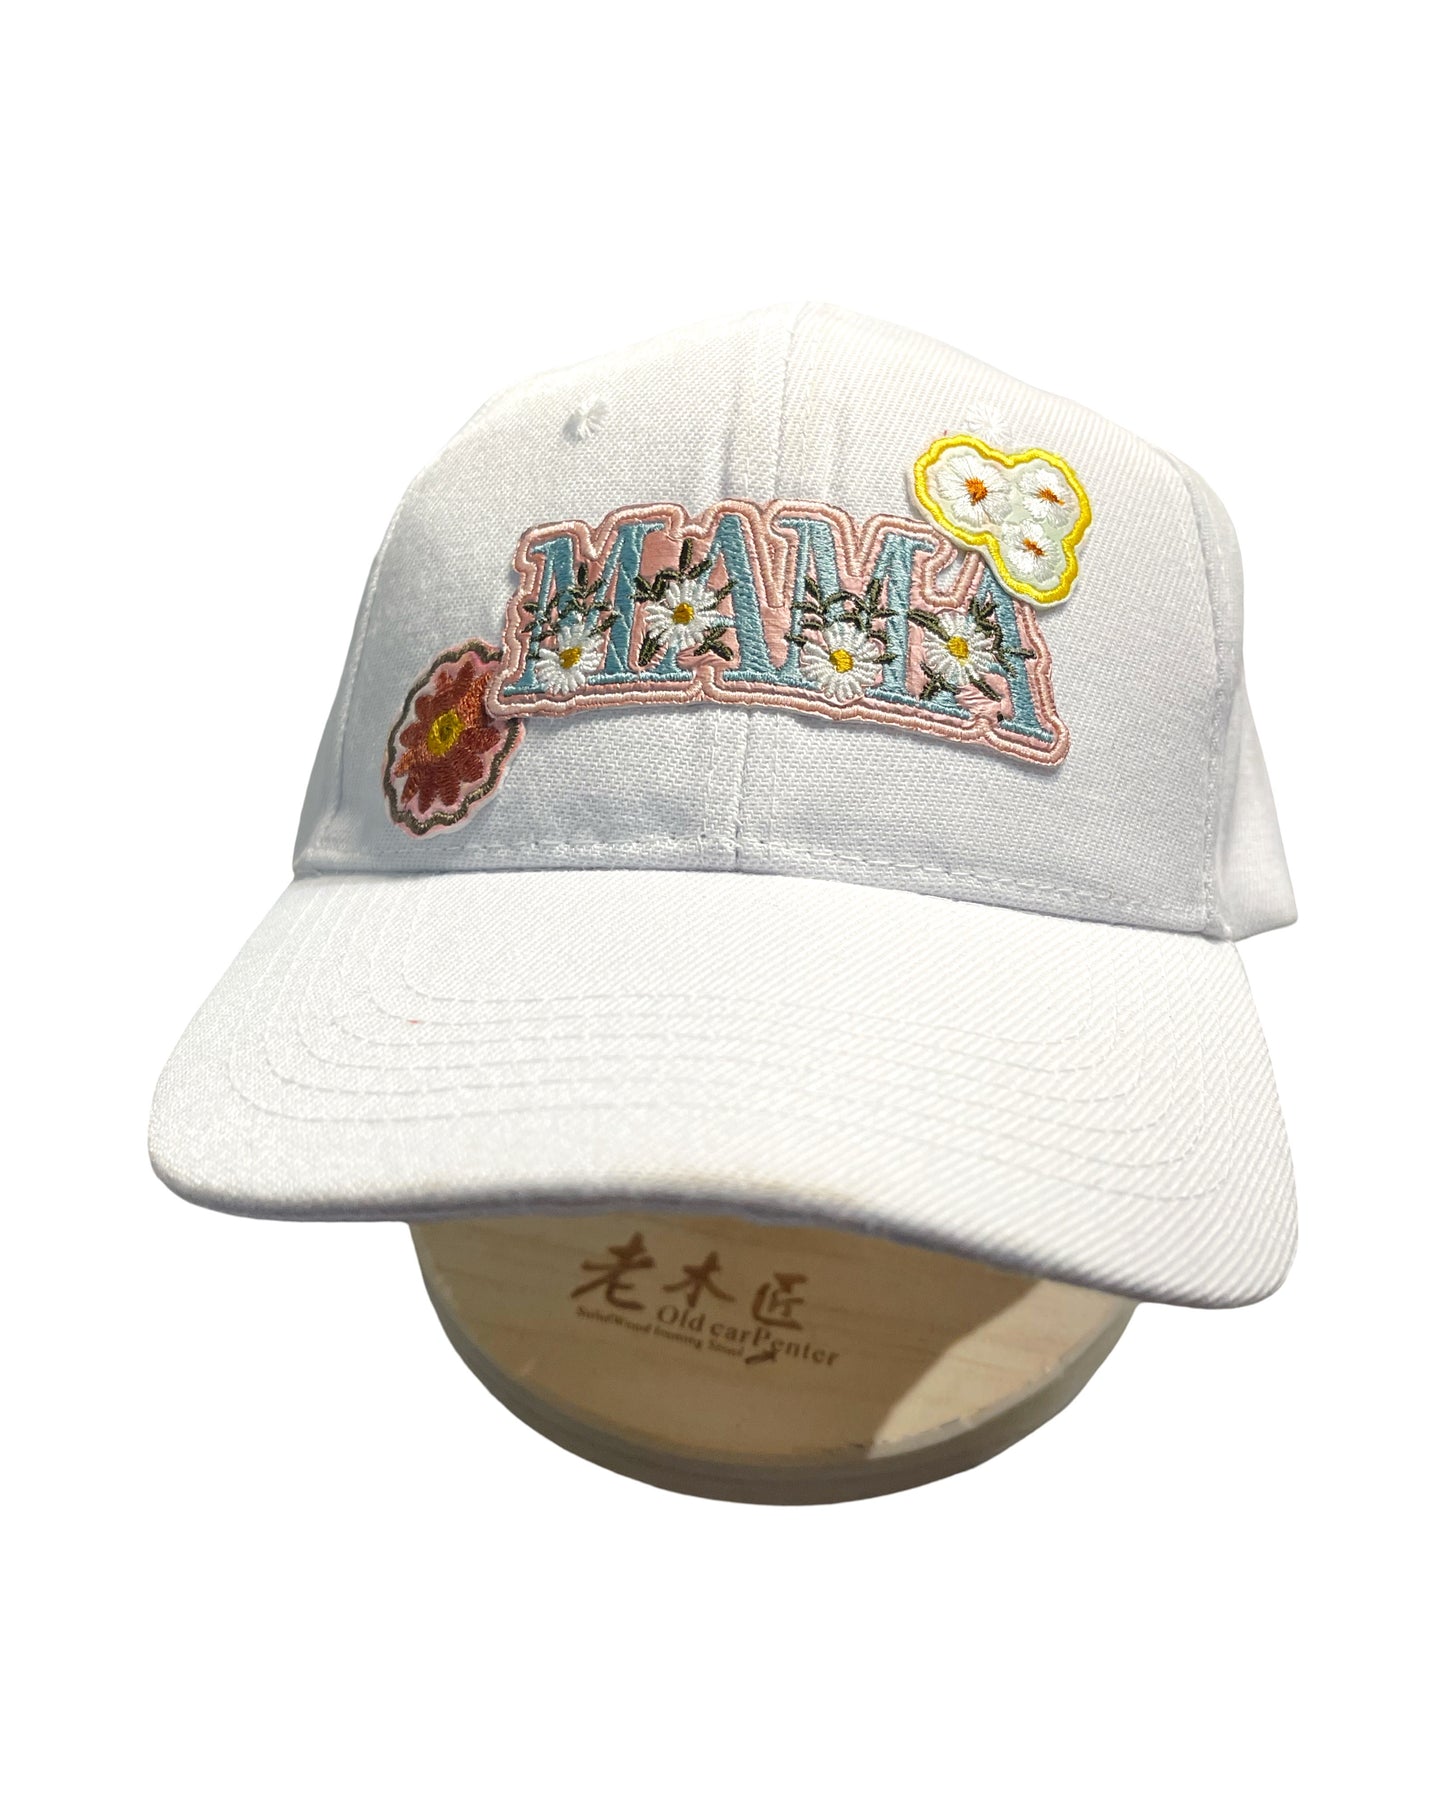 White Baseball Hat with Embroidered 'Mama' and Flower Patches